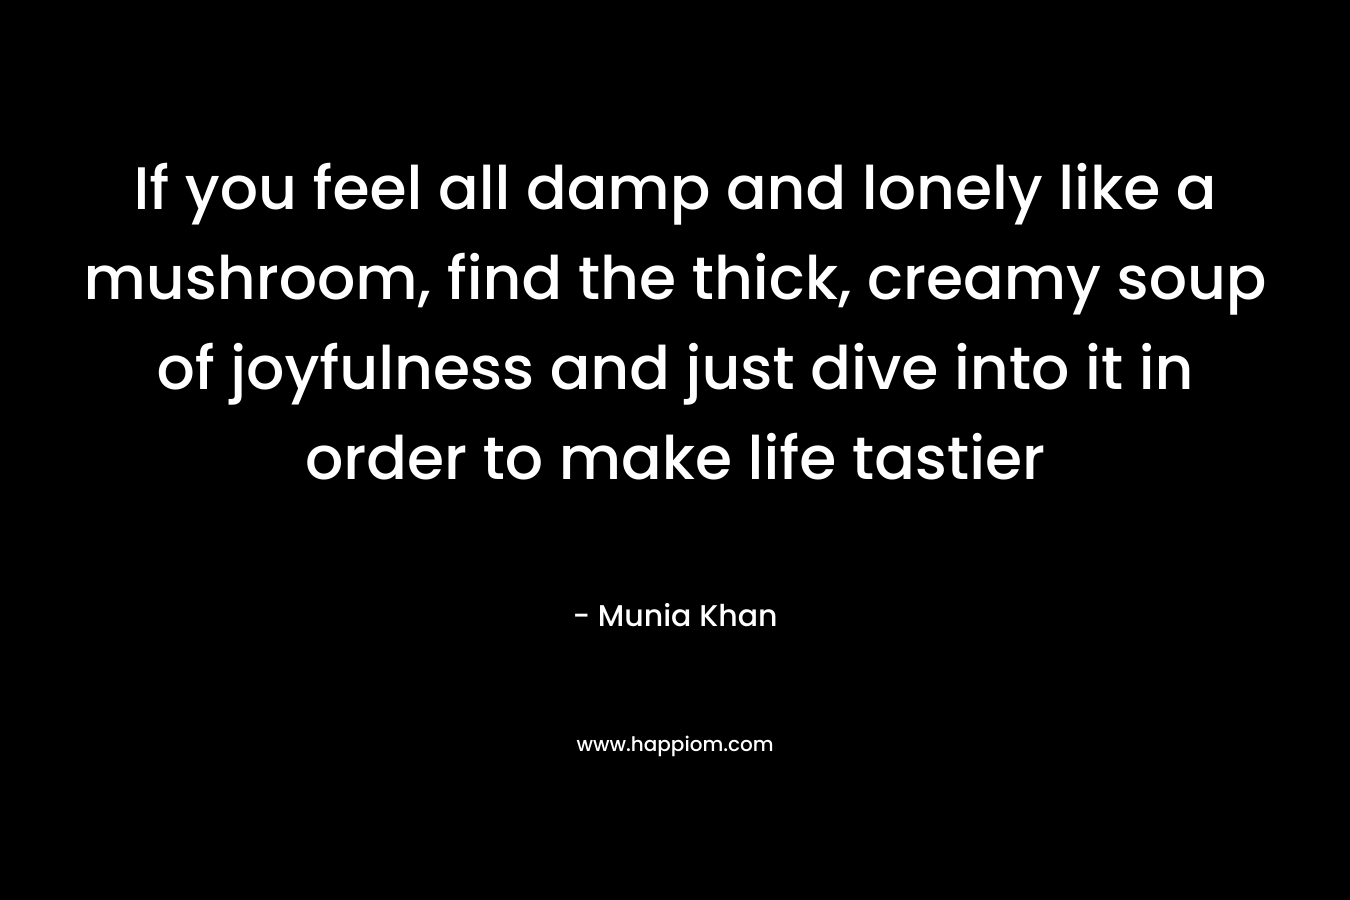 If you feel all damp and lonely like a mushroom, find the thick, creamy soup of joyfulness and just dive into it in order to make life tastier – Munia Khan